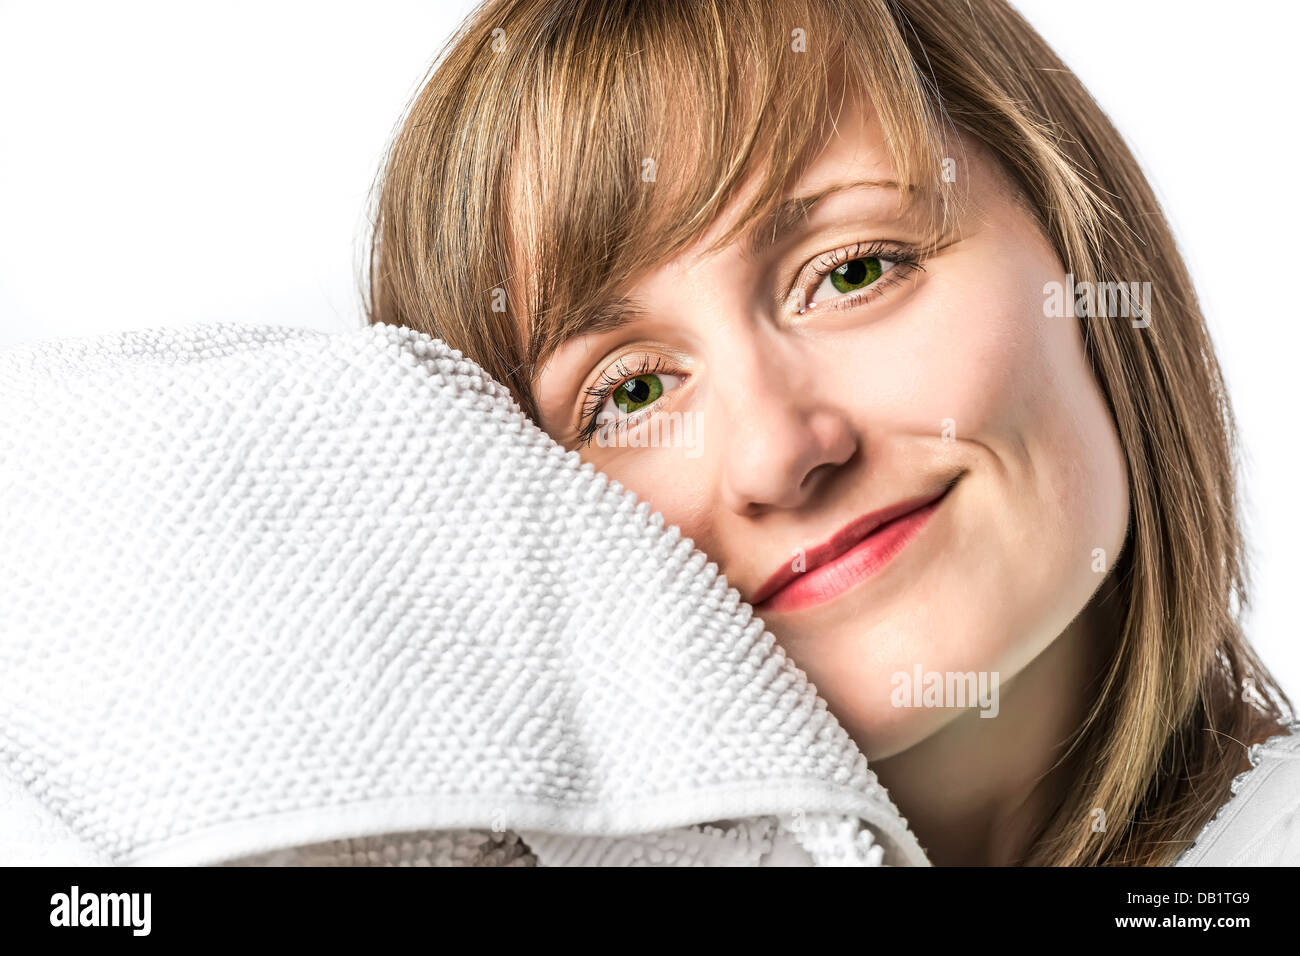 Portrait of a young girl with green eyes set, snuggled in a white towel, isolated on white background Stock Photo